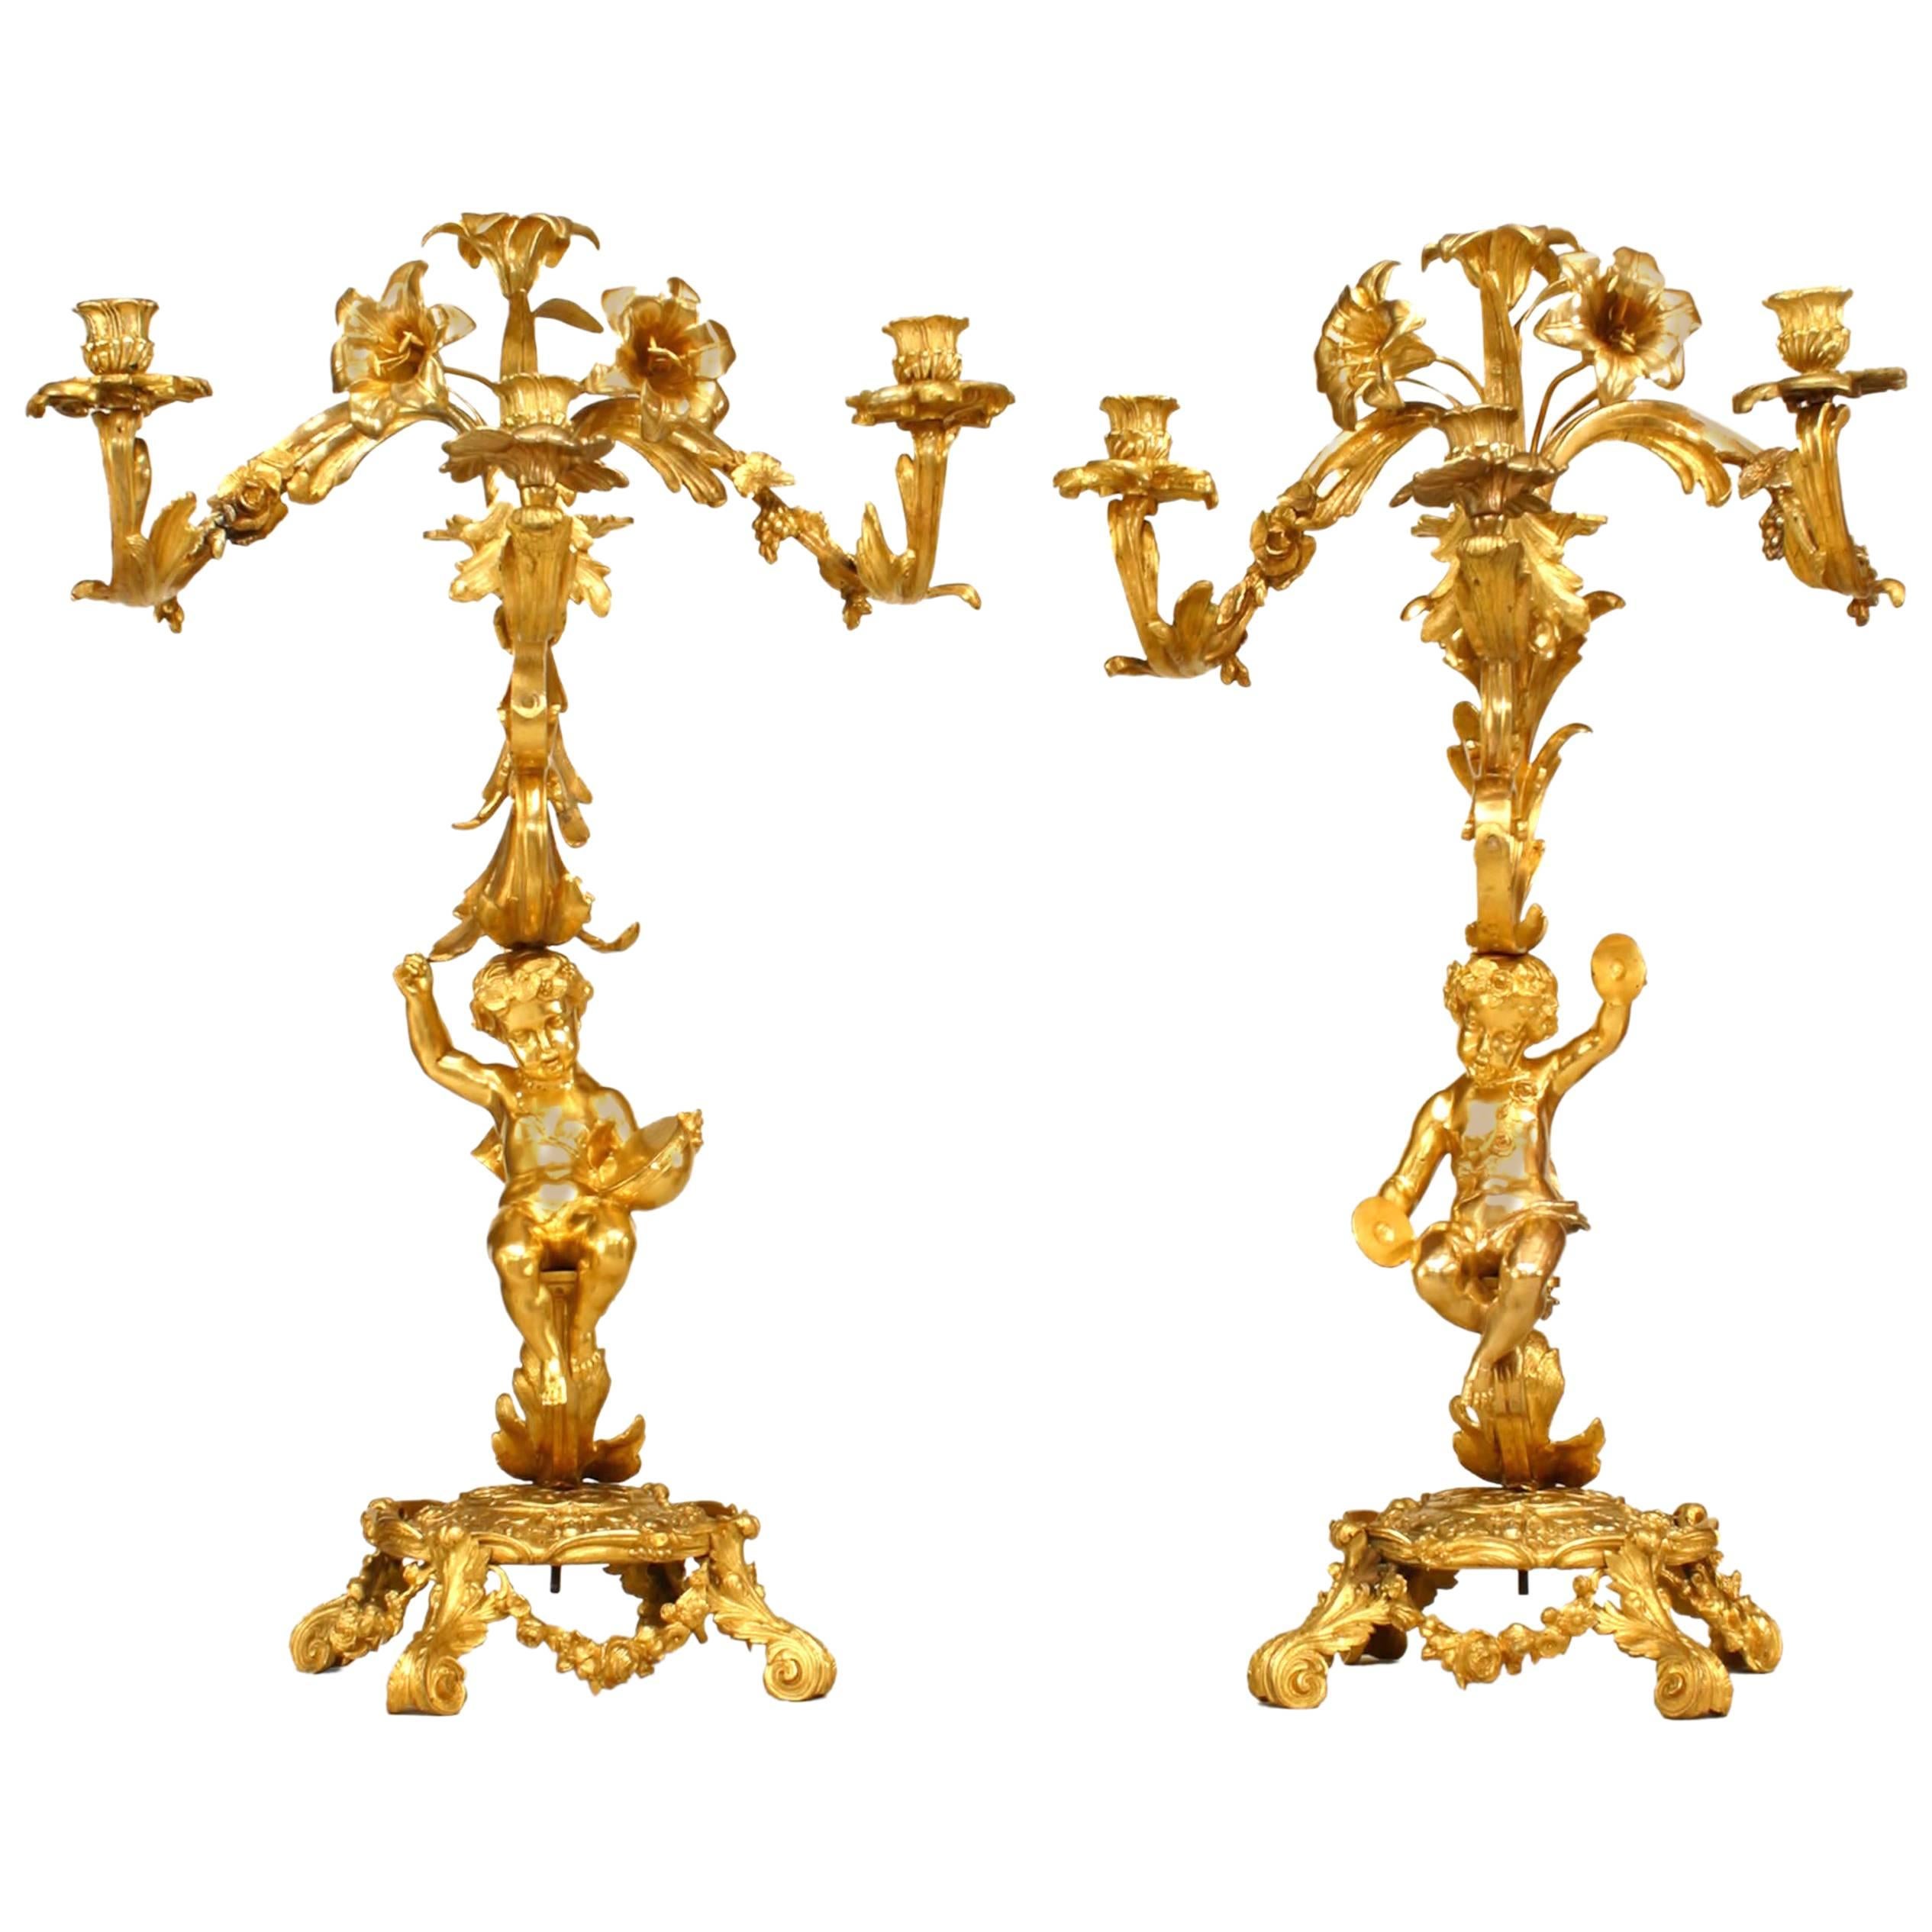 Pair of French Louis XV Bronze Dore Candelabras